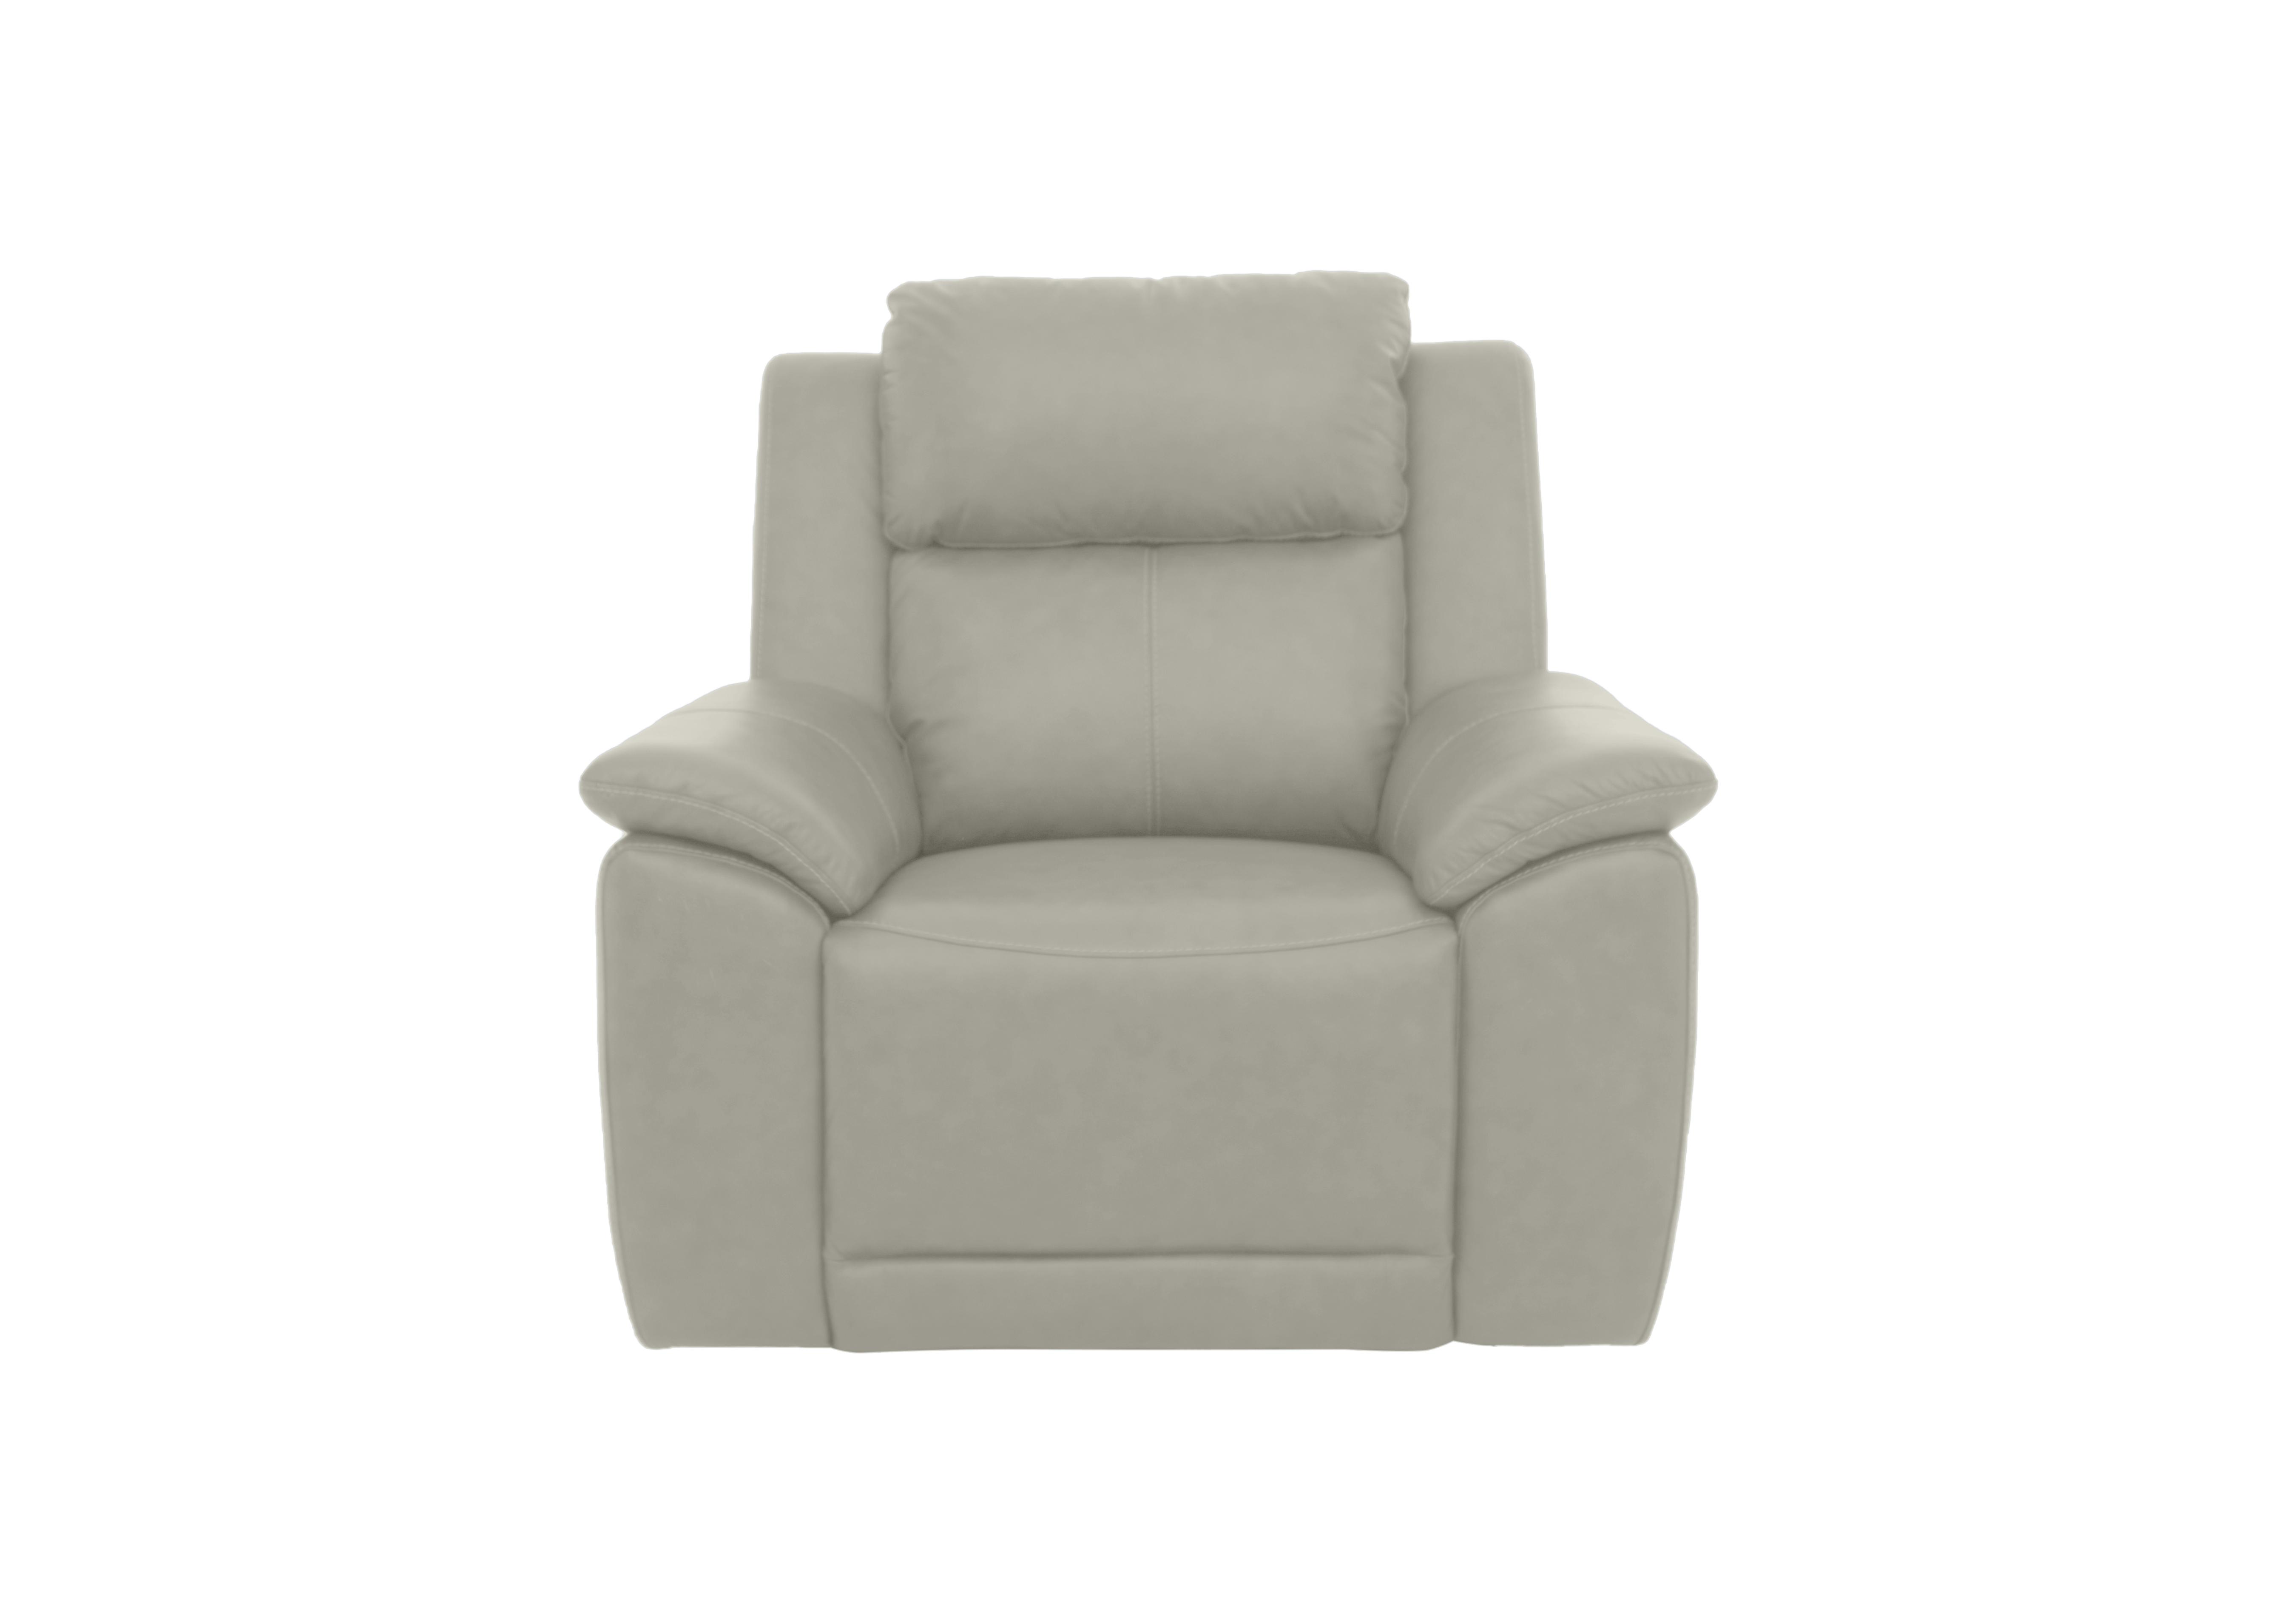 Utah Leather Power Recliner Chair with Power Headrest and Power Lumbar in Sand Le-9303 on Furniture Village